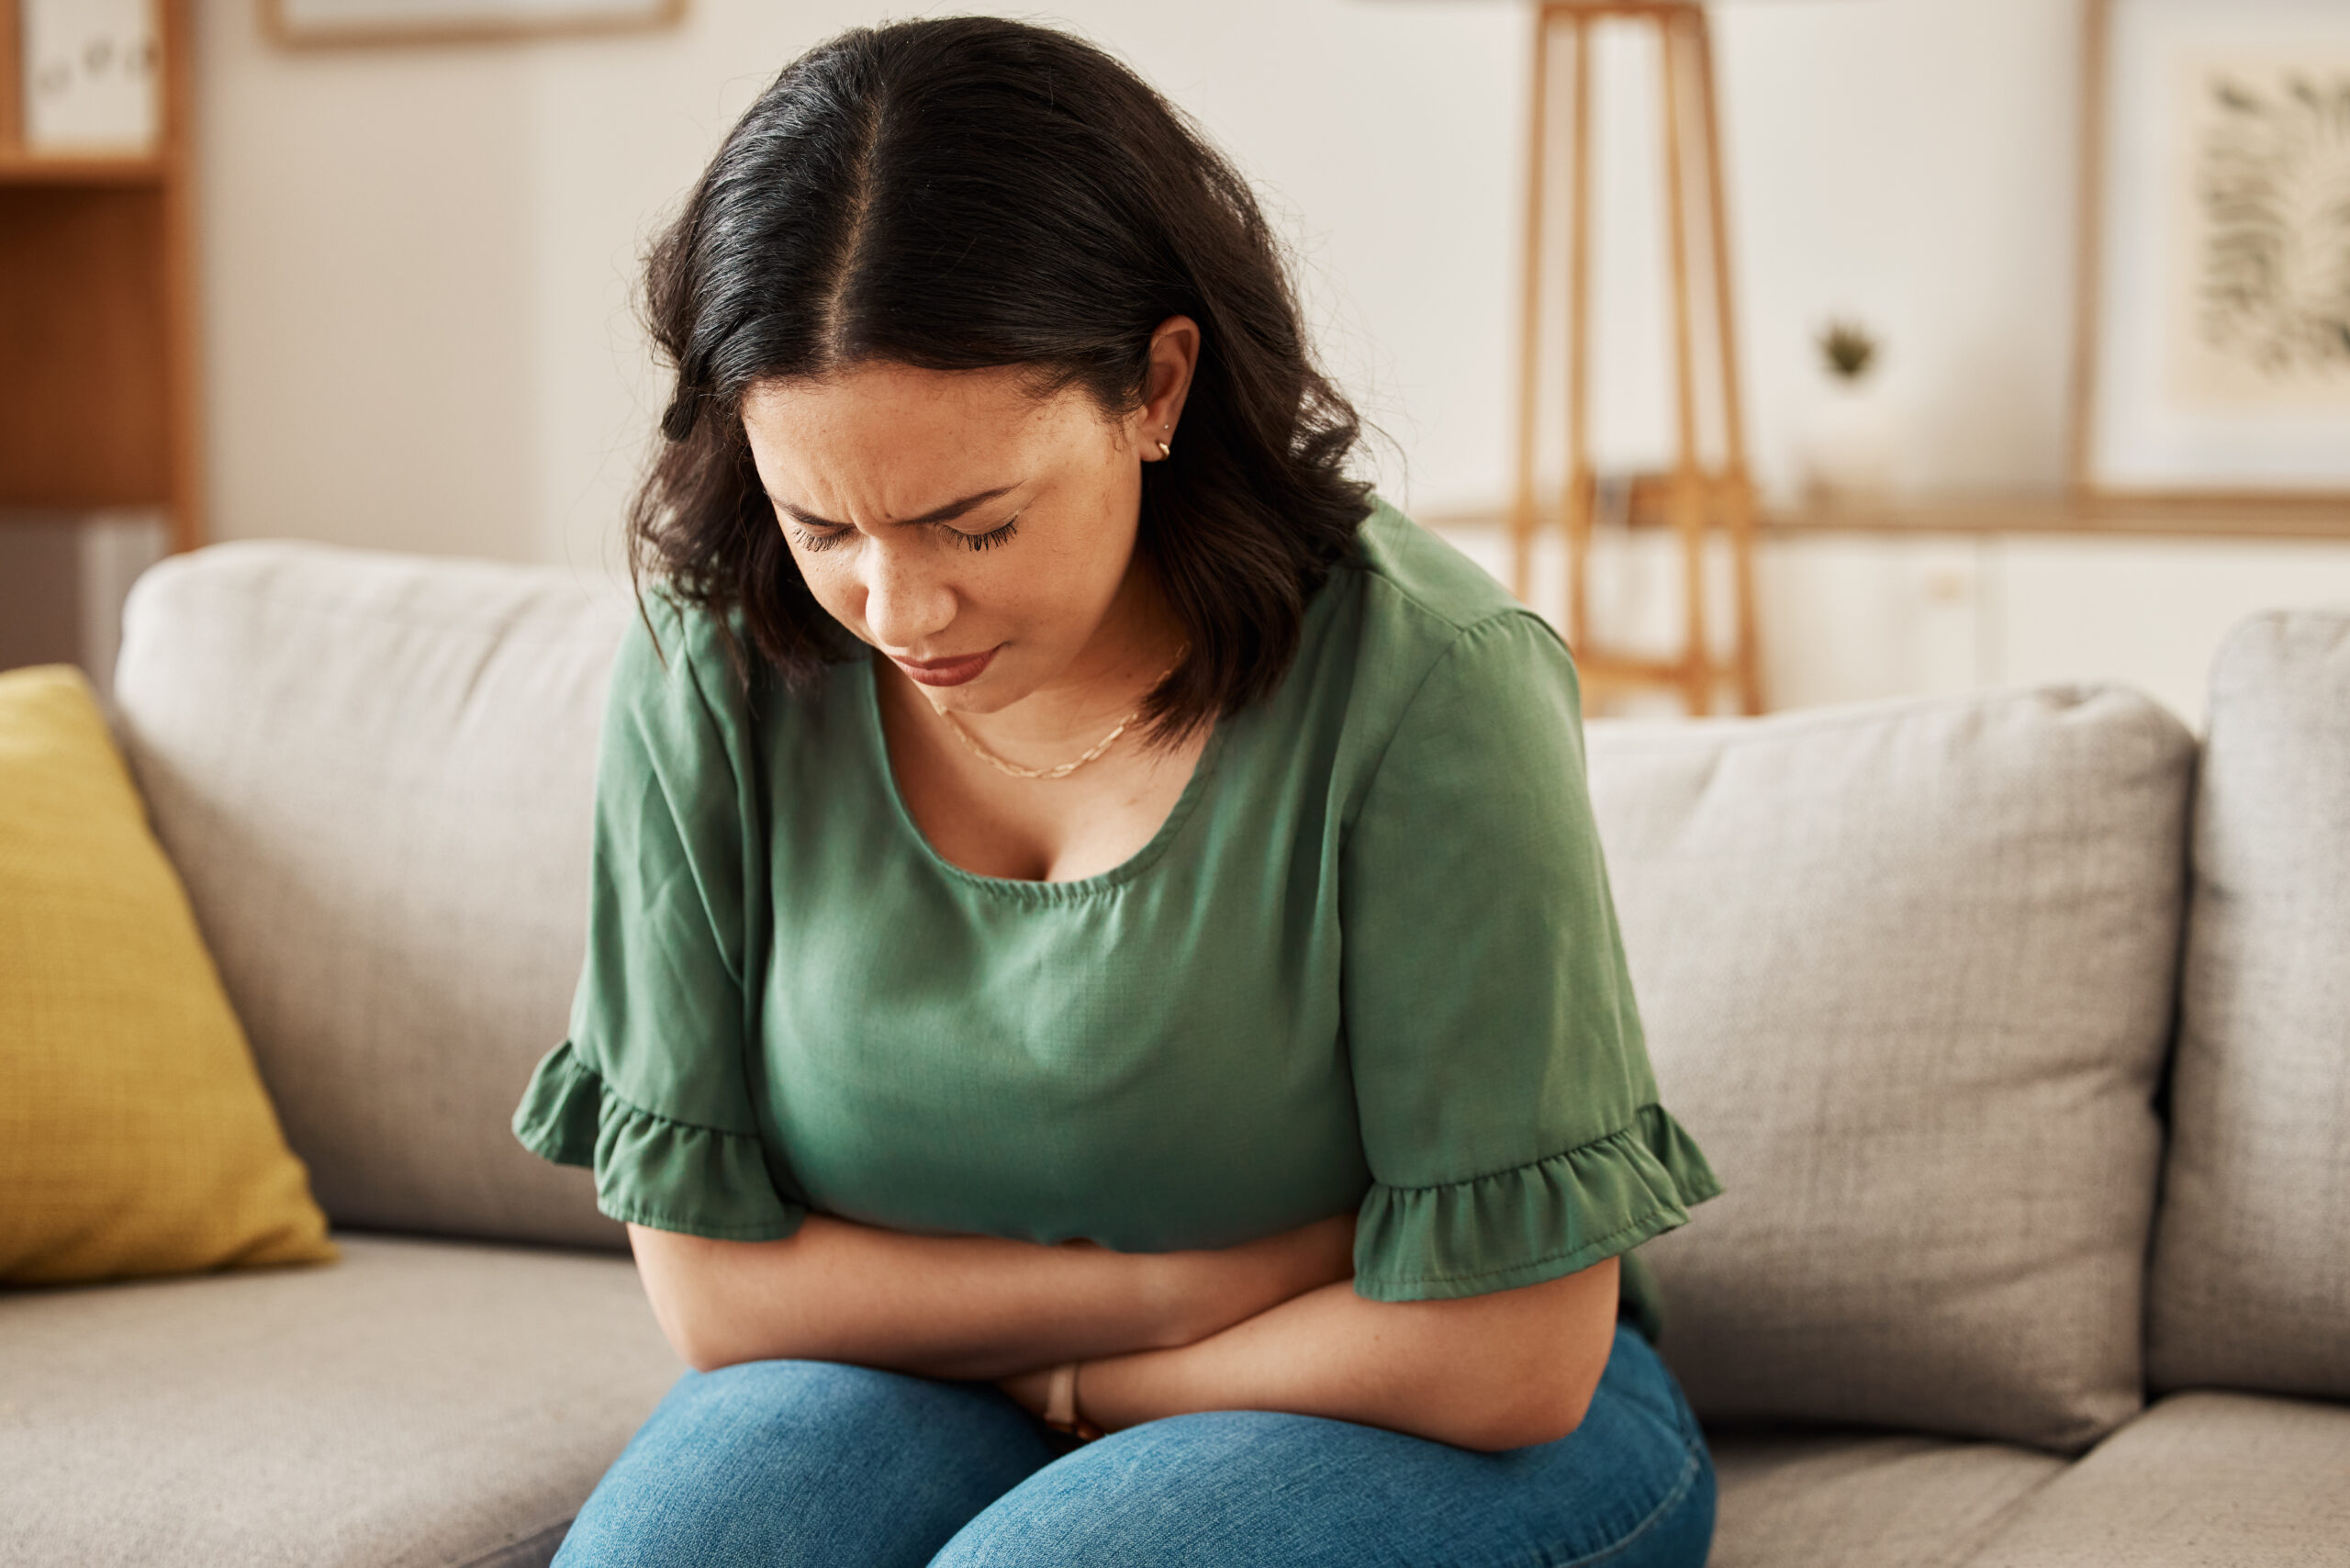 Stress, stomach pain and woman on a sofa with menstruation, gas or constipation, pms or nausea at home. Gut health, anxiety and lady with tummy ache in living room from ibs, bloated or endometriosis.